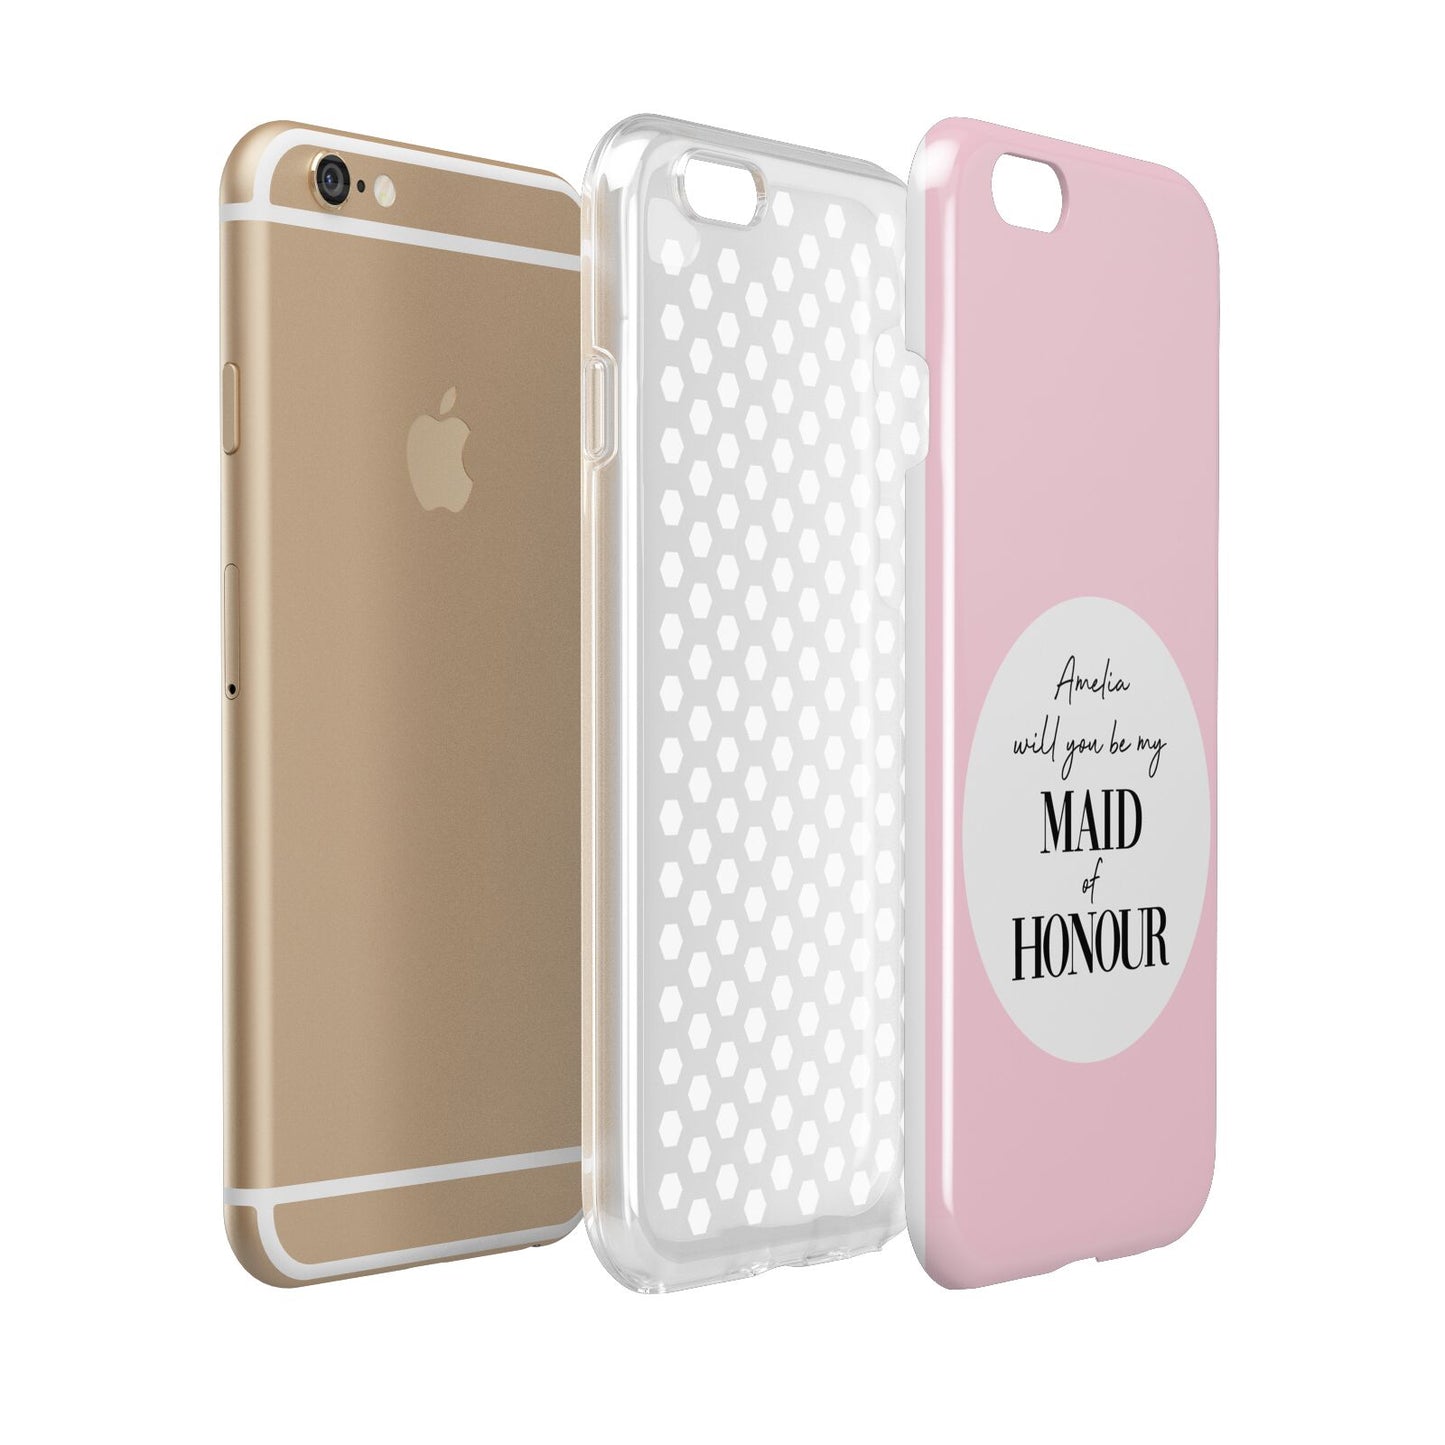 Will You Be My Maid Of Honour Apple iPhone 6 3D Tough Case Expanded view